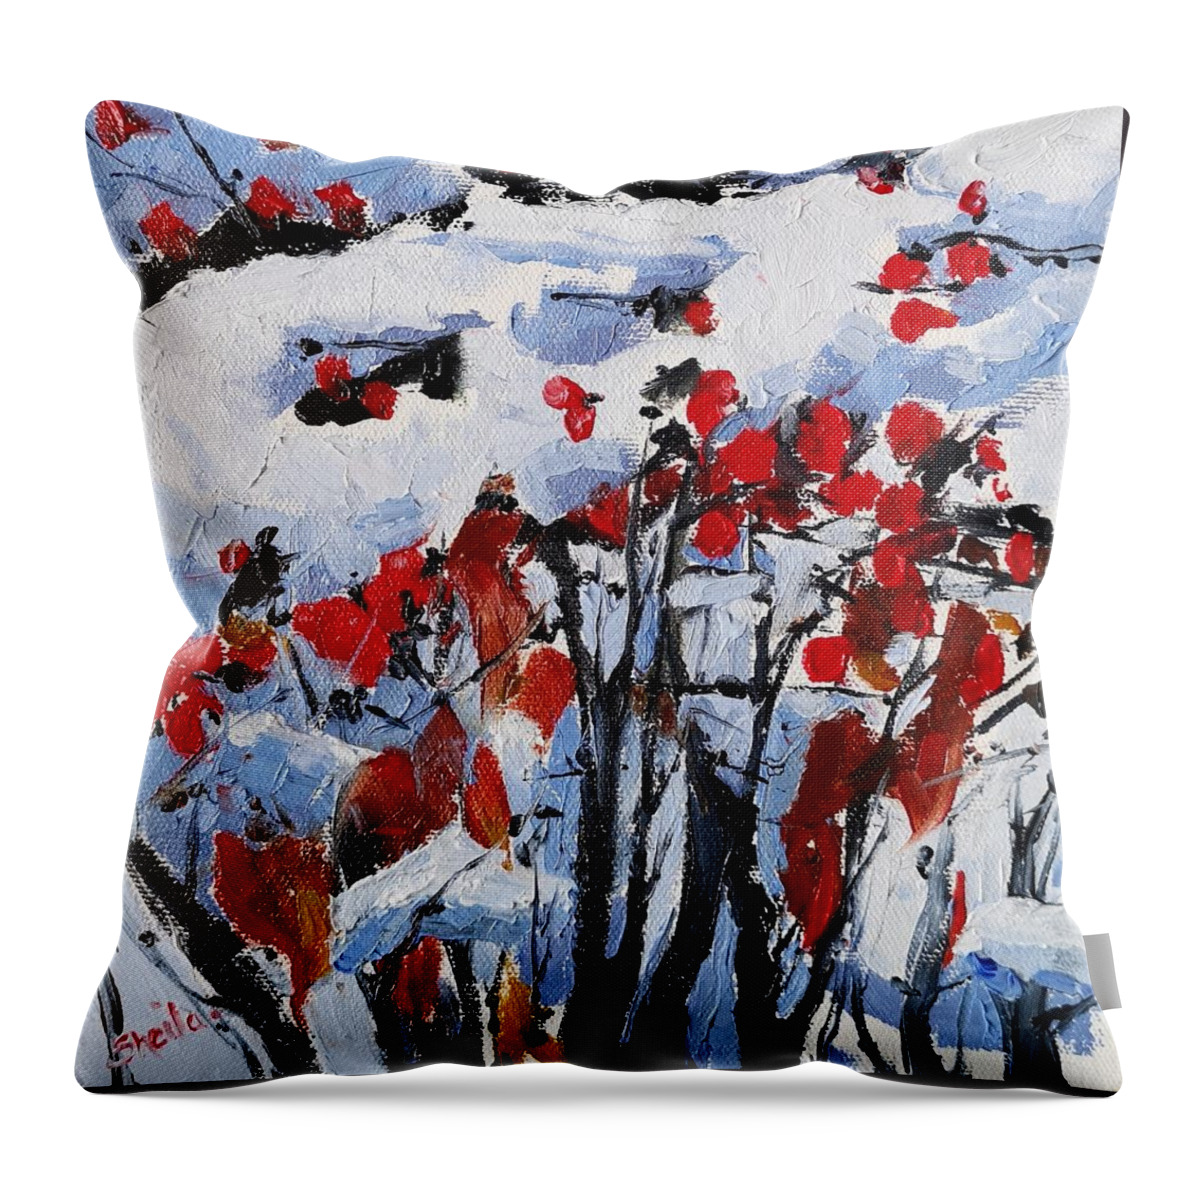 Winter Throw Pillow featuring the painting Winter Berries by Sheila Romard